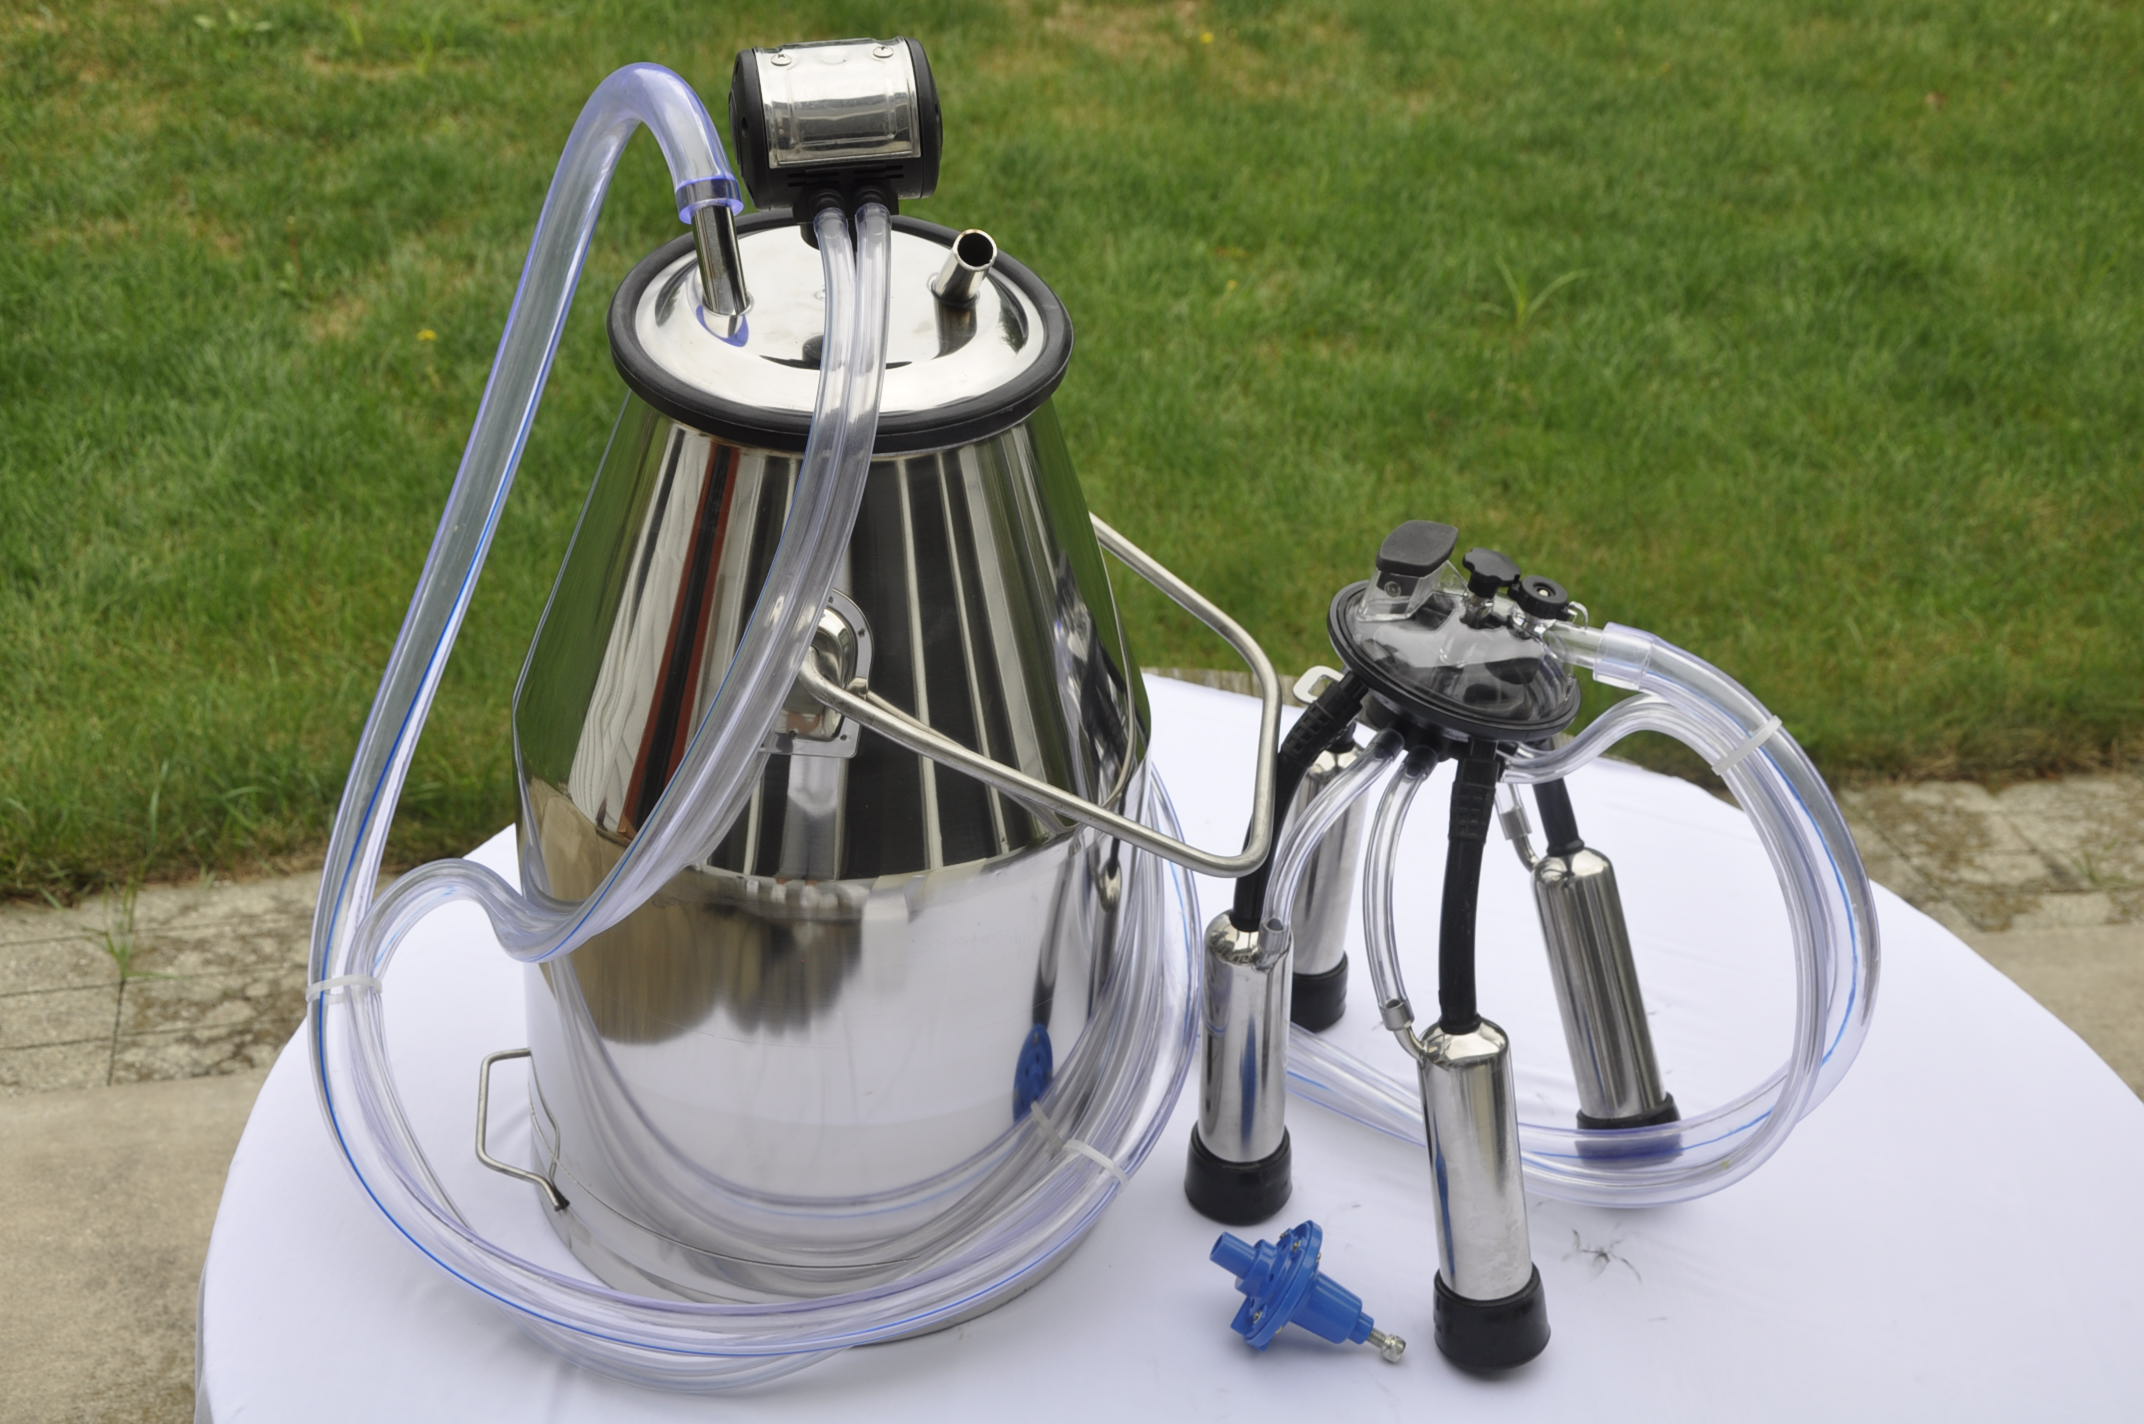 Bucket Milker Single Cow Miling 25 L SS+ Claw Cluster MC30 Shells Teat-cups and Rubber Liners+Hoses